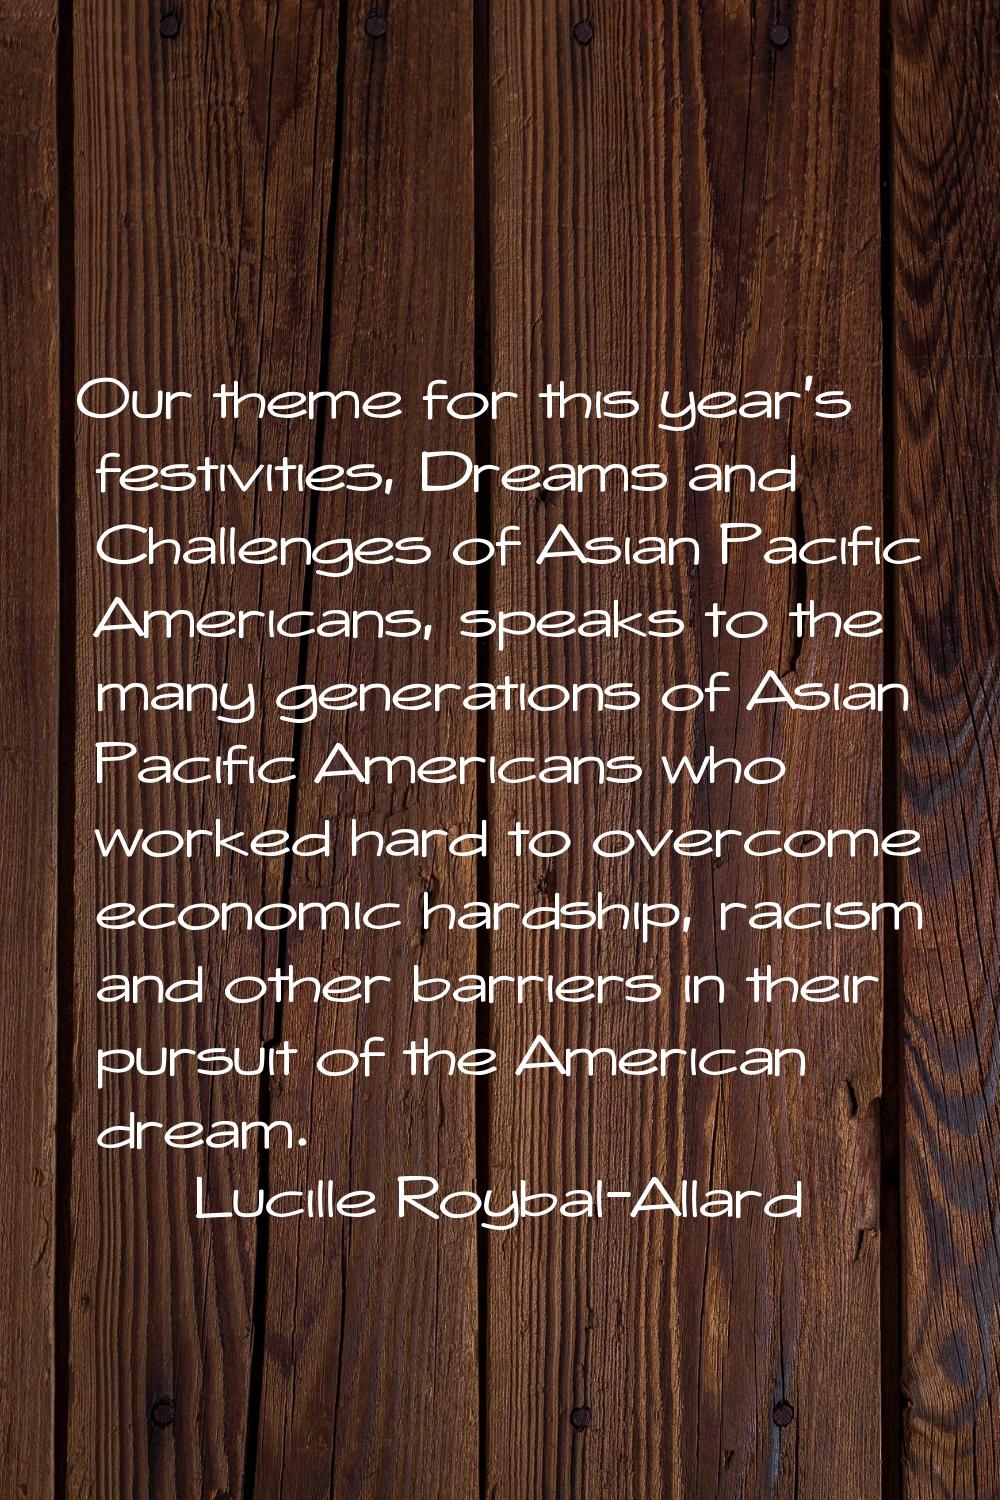 Our theme for this year's festivities, Dreams and Challenges of Asian Pacific Americans, speaks to 